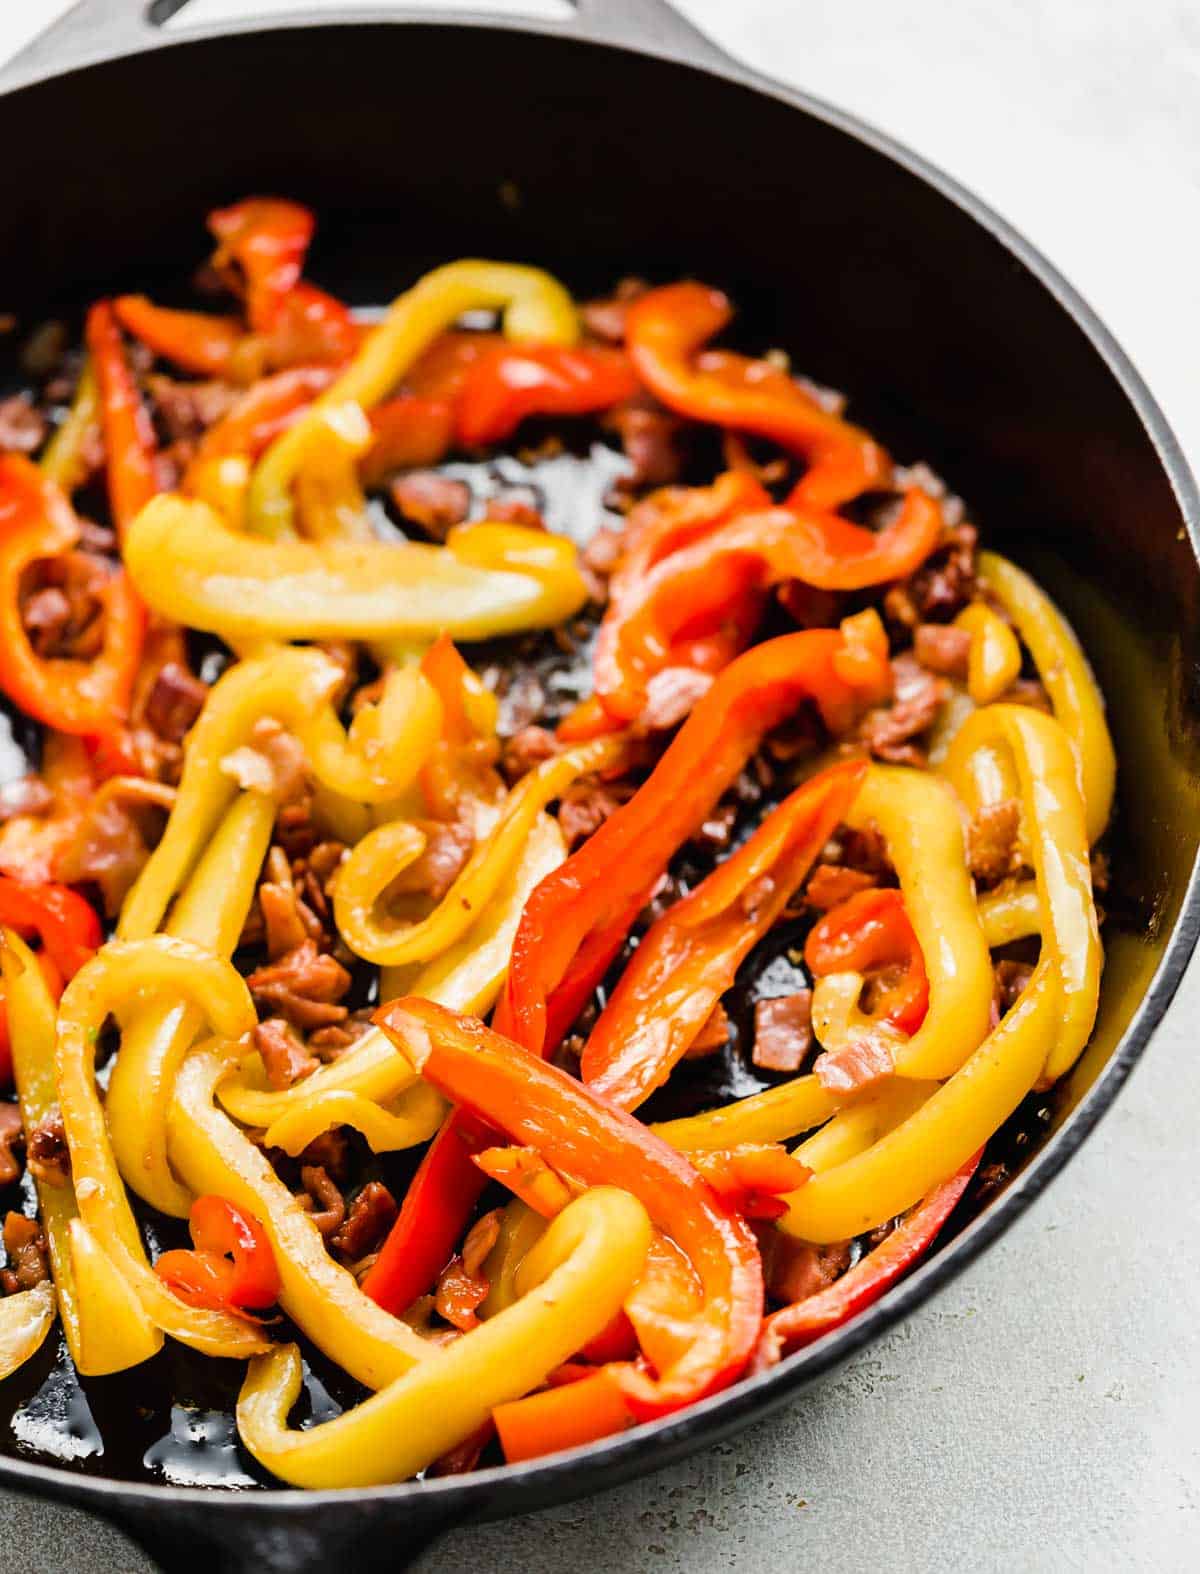 Sliced red and yellow peppers with prosciutto in a skillet.